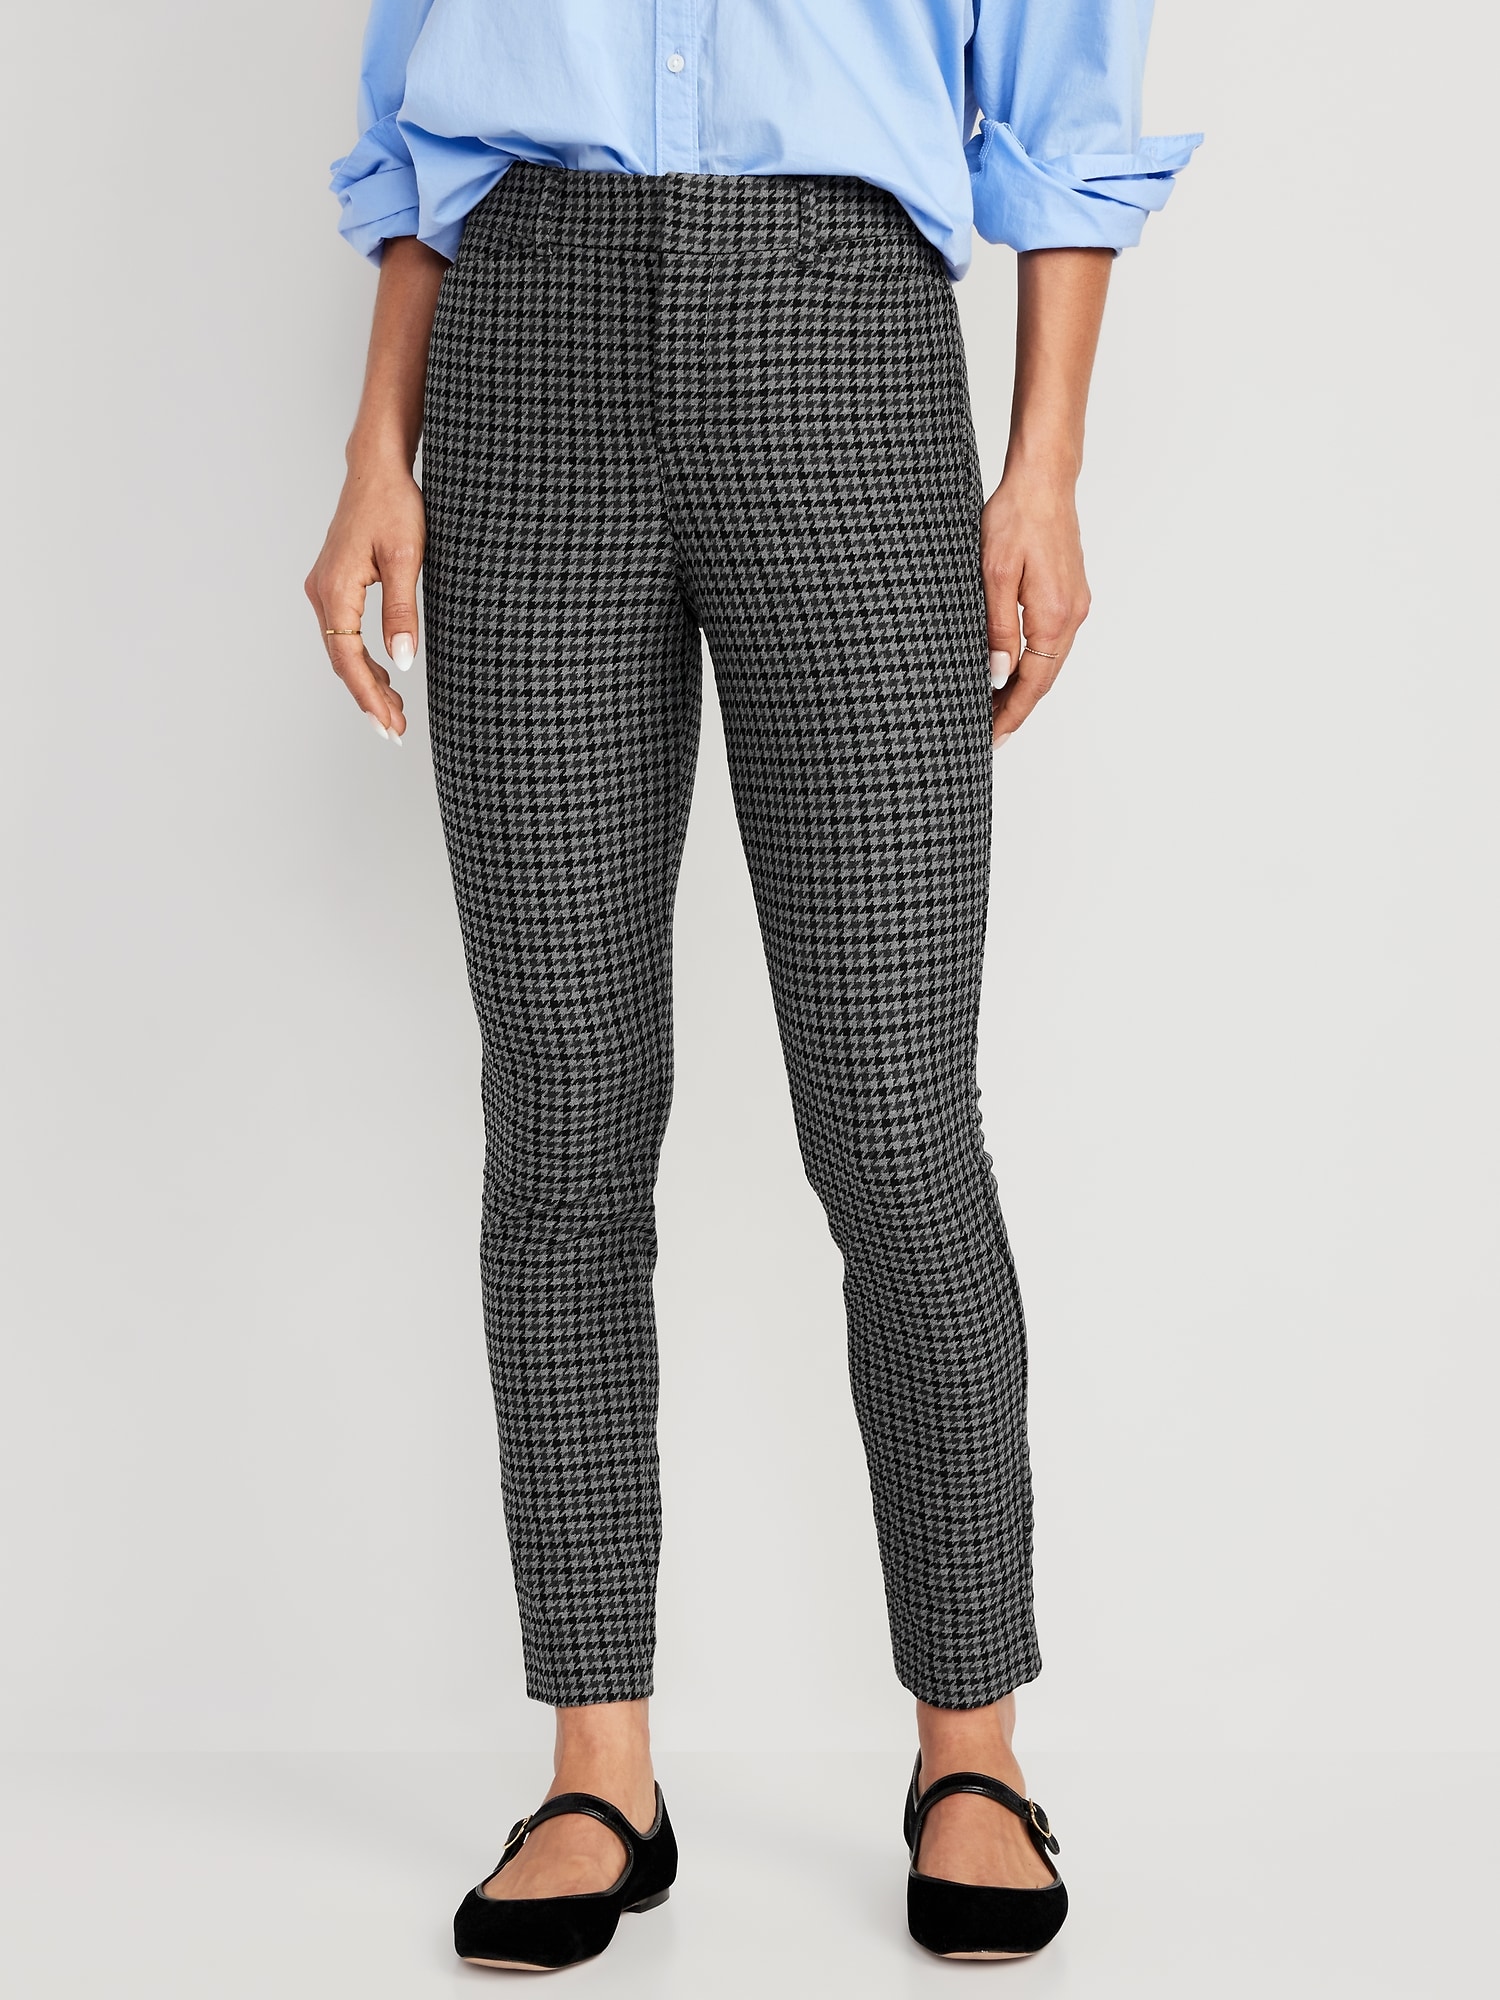 Old Navy The Pixie Ankle Pants, $34, Old Navy